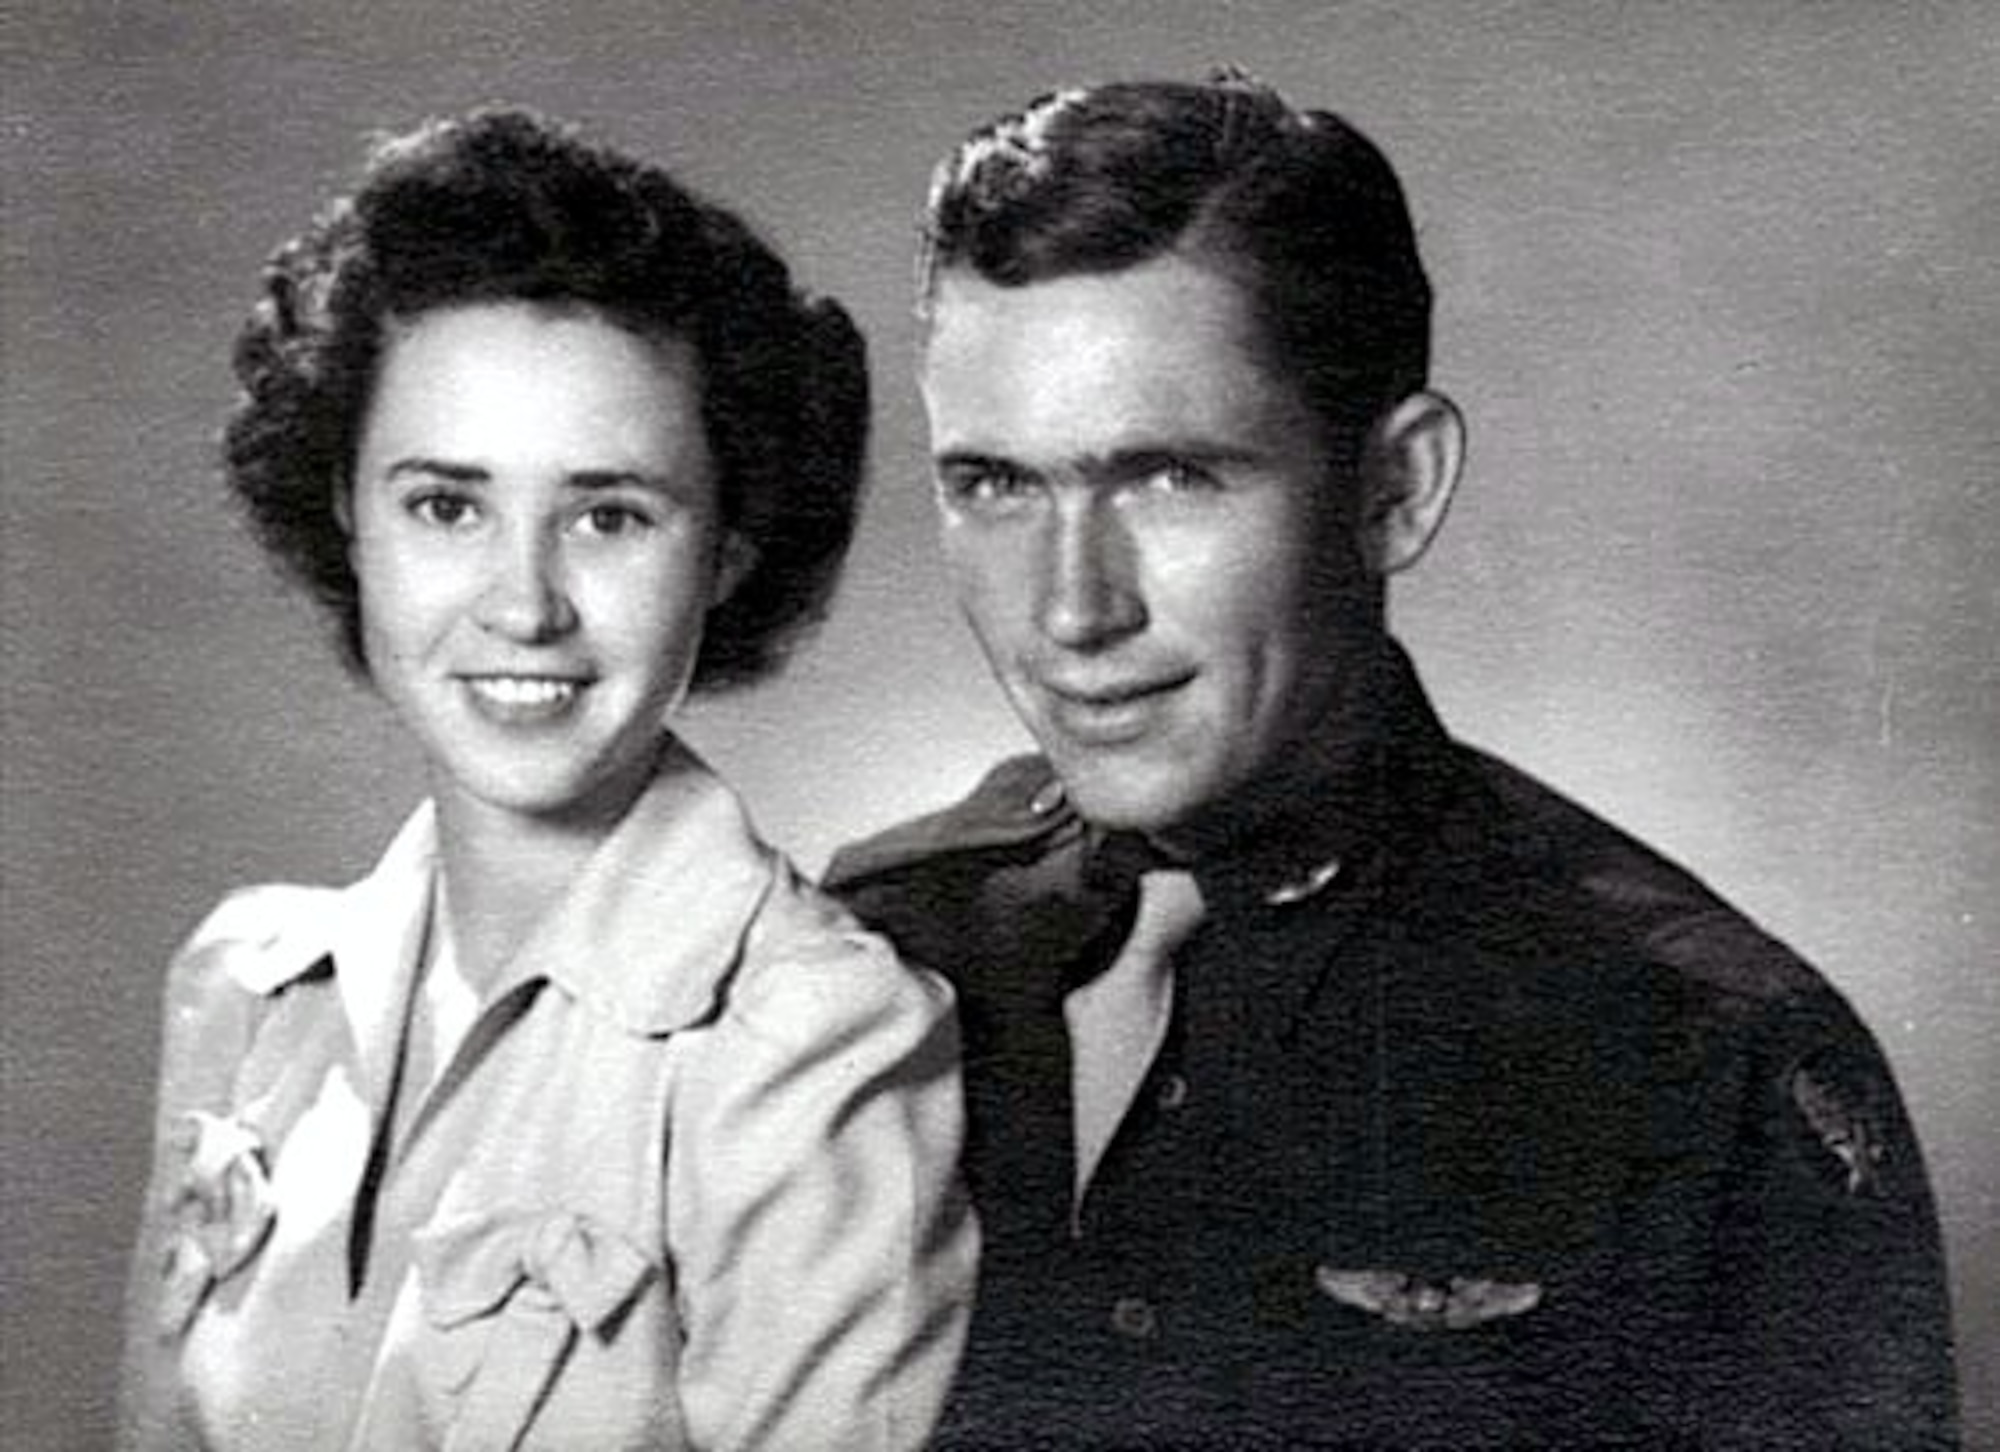 Peggy S. Harris and 1st Lt. Billie D. Harris were married for just six weeks before 1st Lt. Harris deployed in World War II. Harris was flying a mission over Nazi-occupied France when his plane was shot down and crashed into the woods near a small town in Normandy. He never returned home. Peggy was on a 60-year journey to find answers to her husband’s whereabouts.   (Courtesy photo)